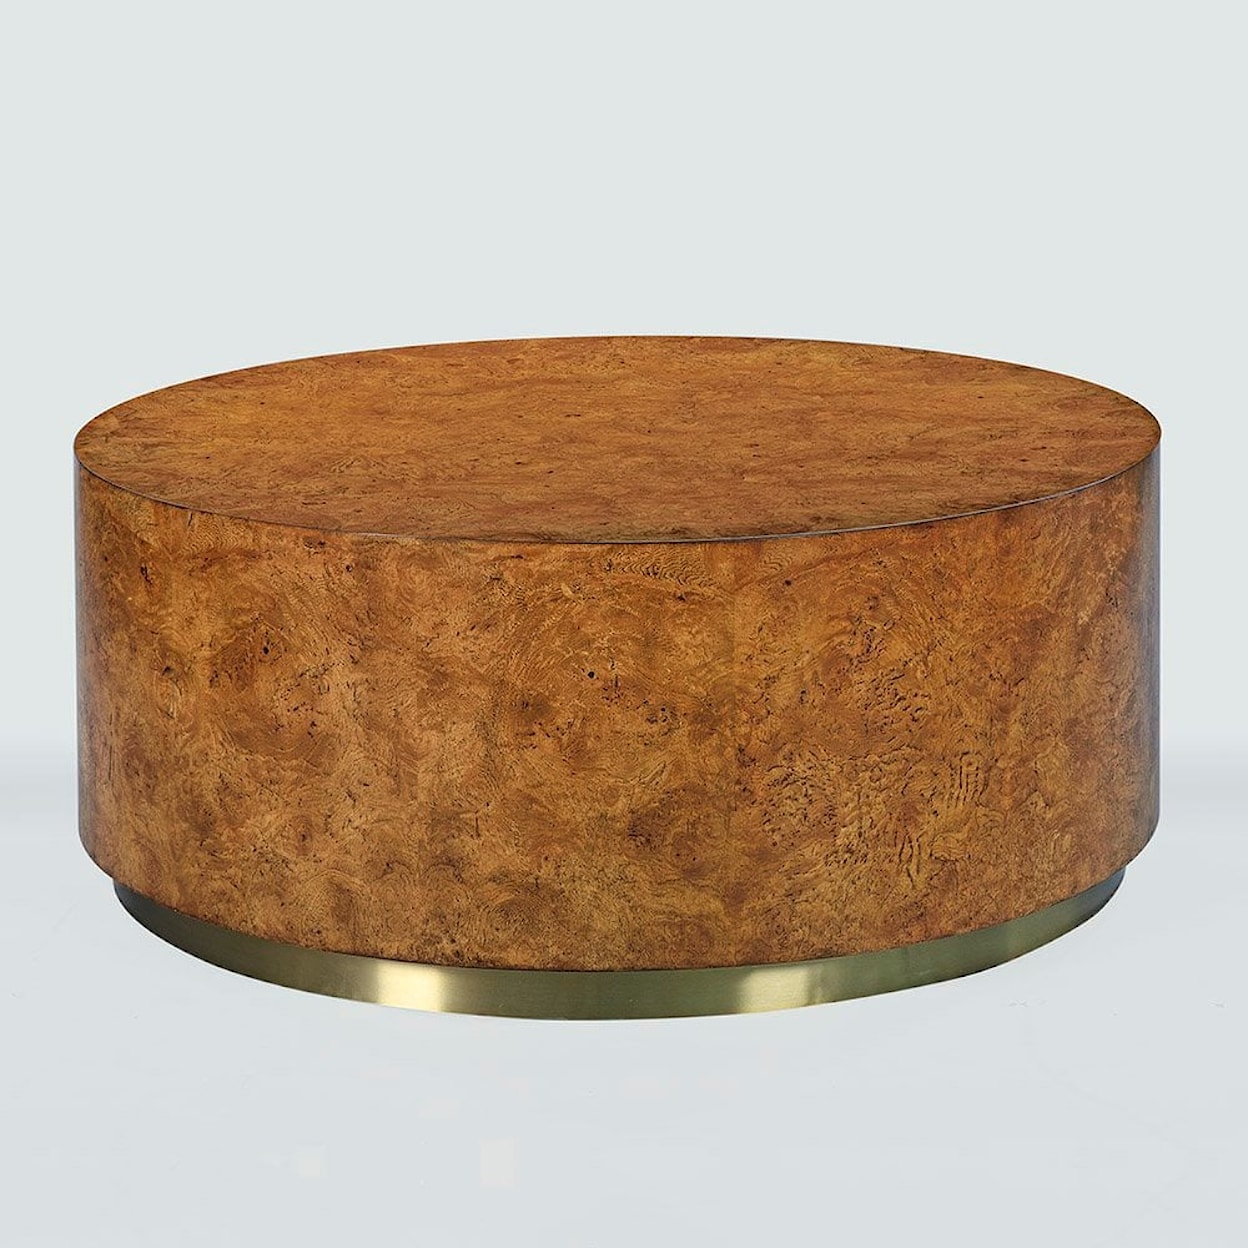 Oliver Home Furnishings Coffee Tables ROUND BURL COFFEE TABLE- RUSTIC BURL